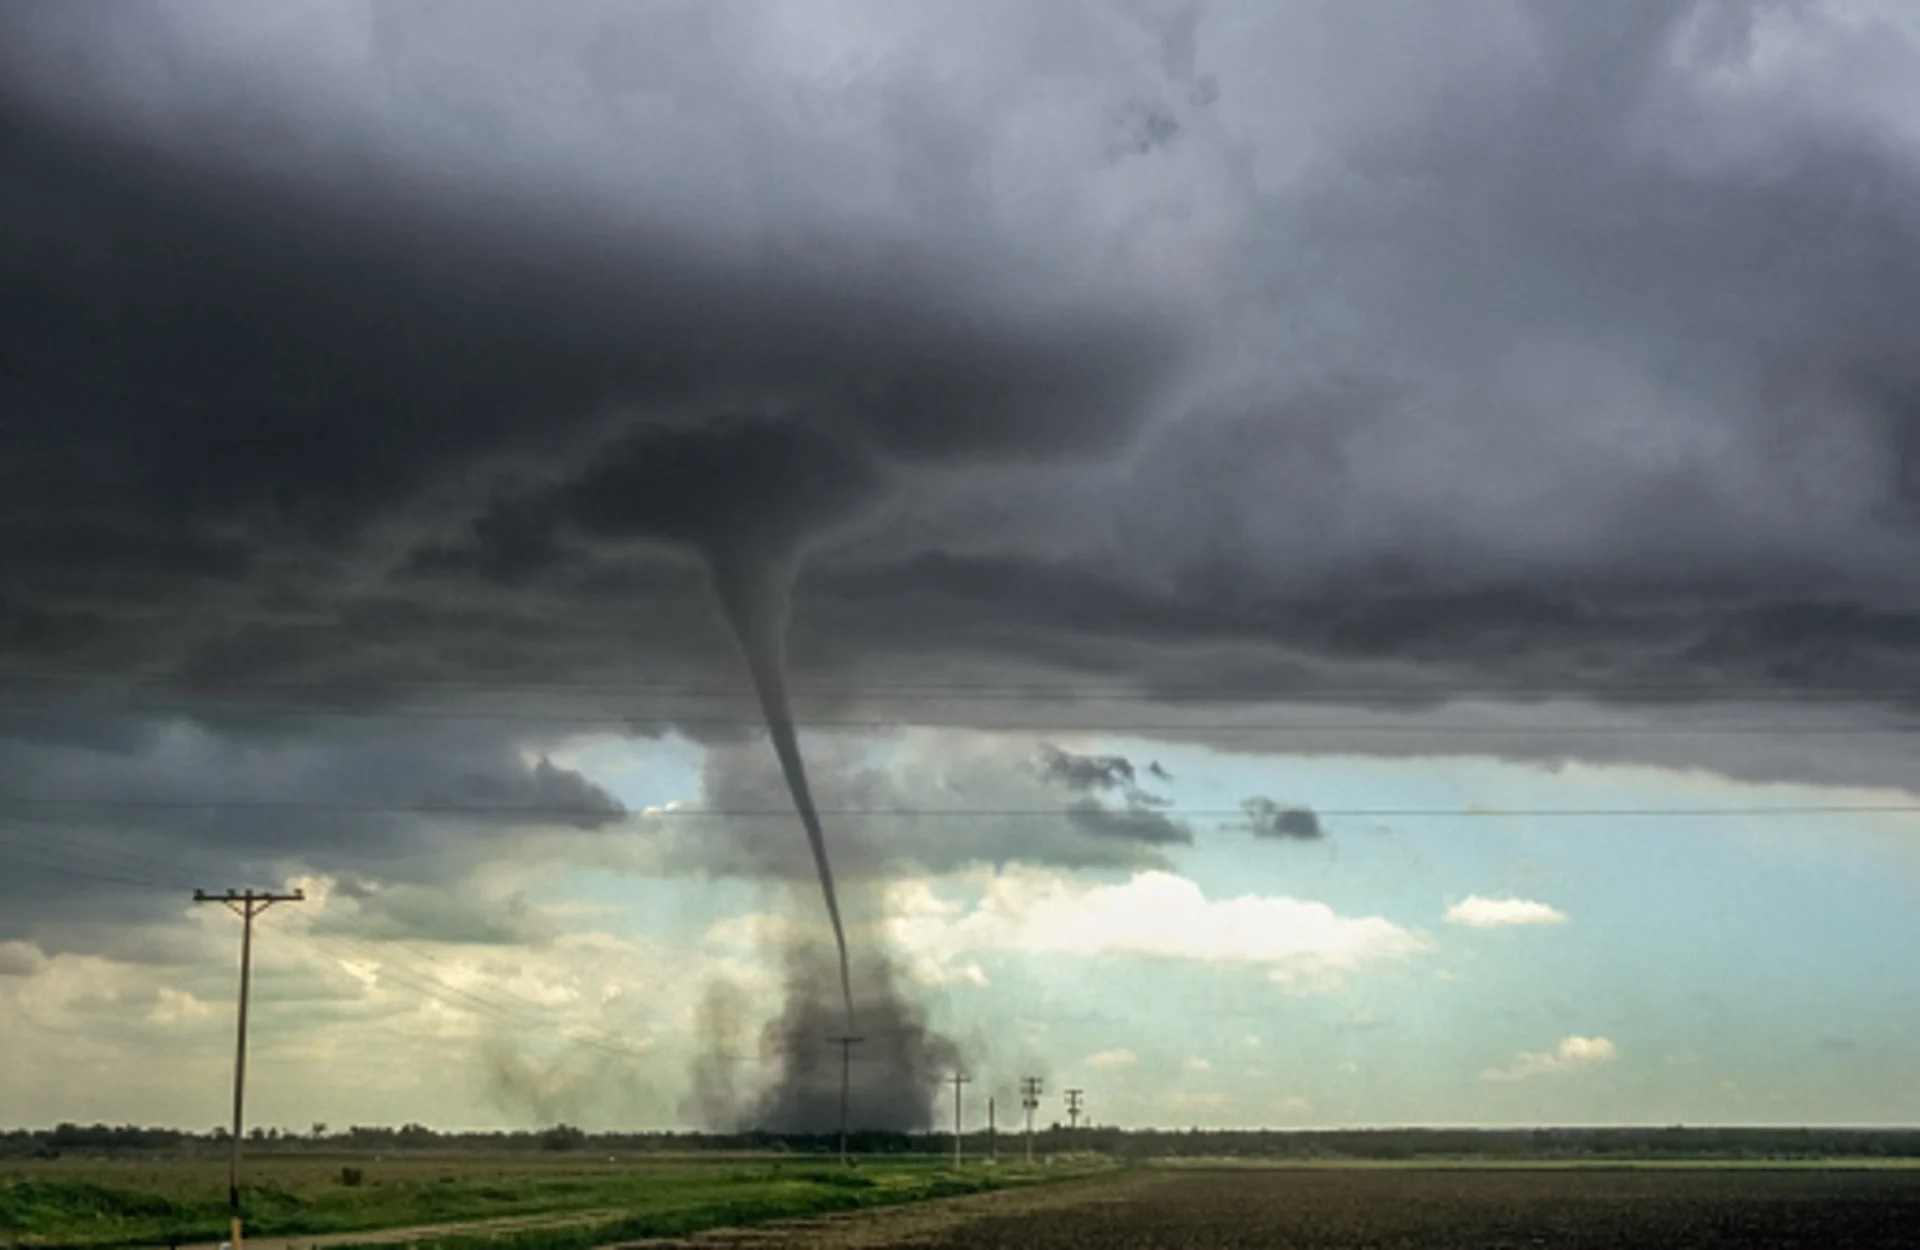 Is there a secret tornado alley hiding in B.C.? Find out what our meteorologist uncovered ... 